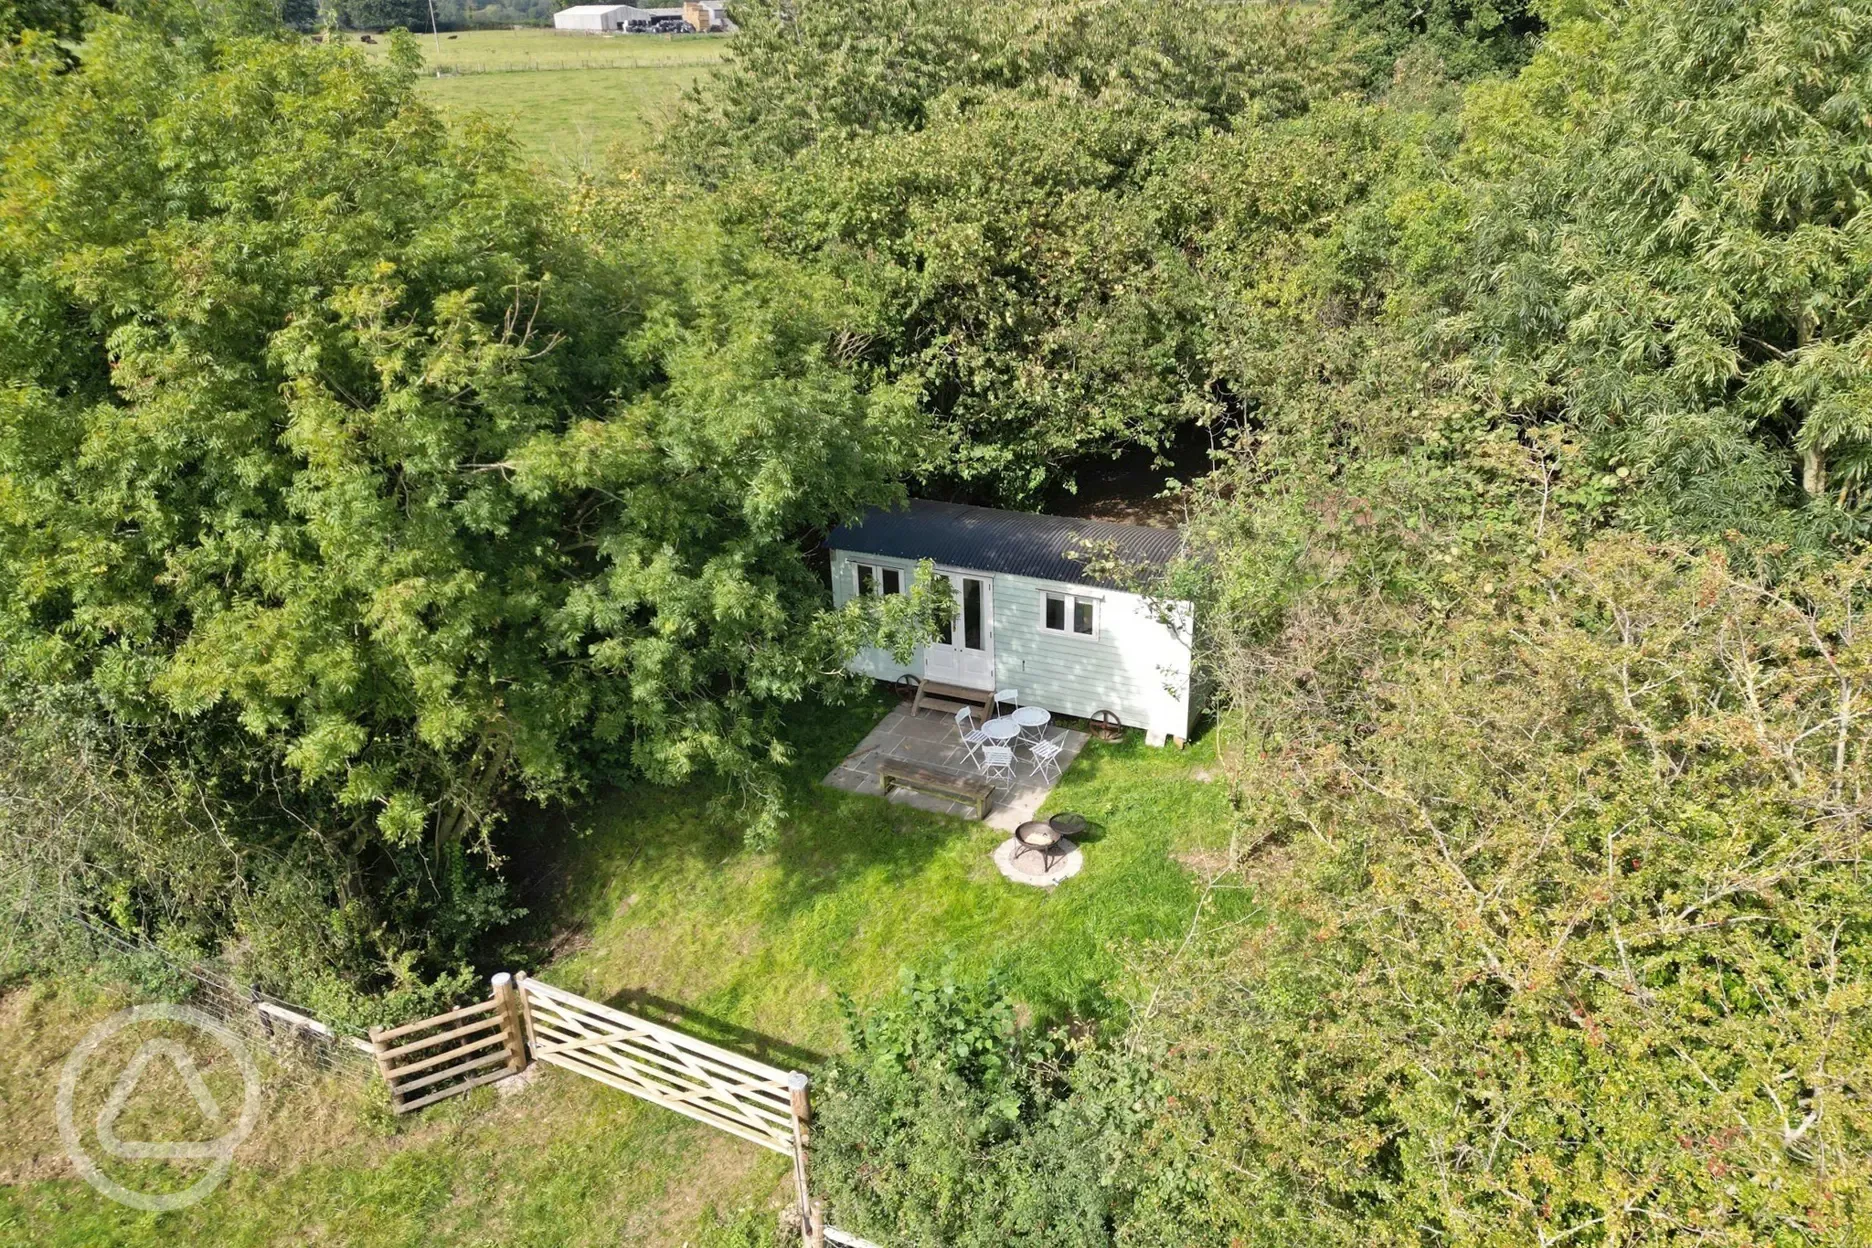 Aerial of the shepherd's hut and countryside setting